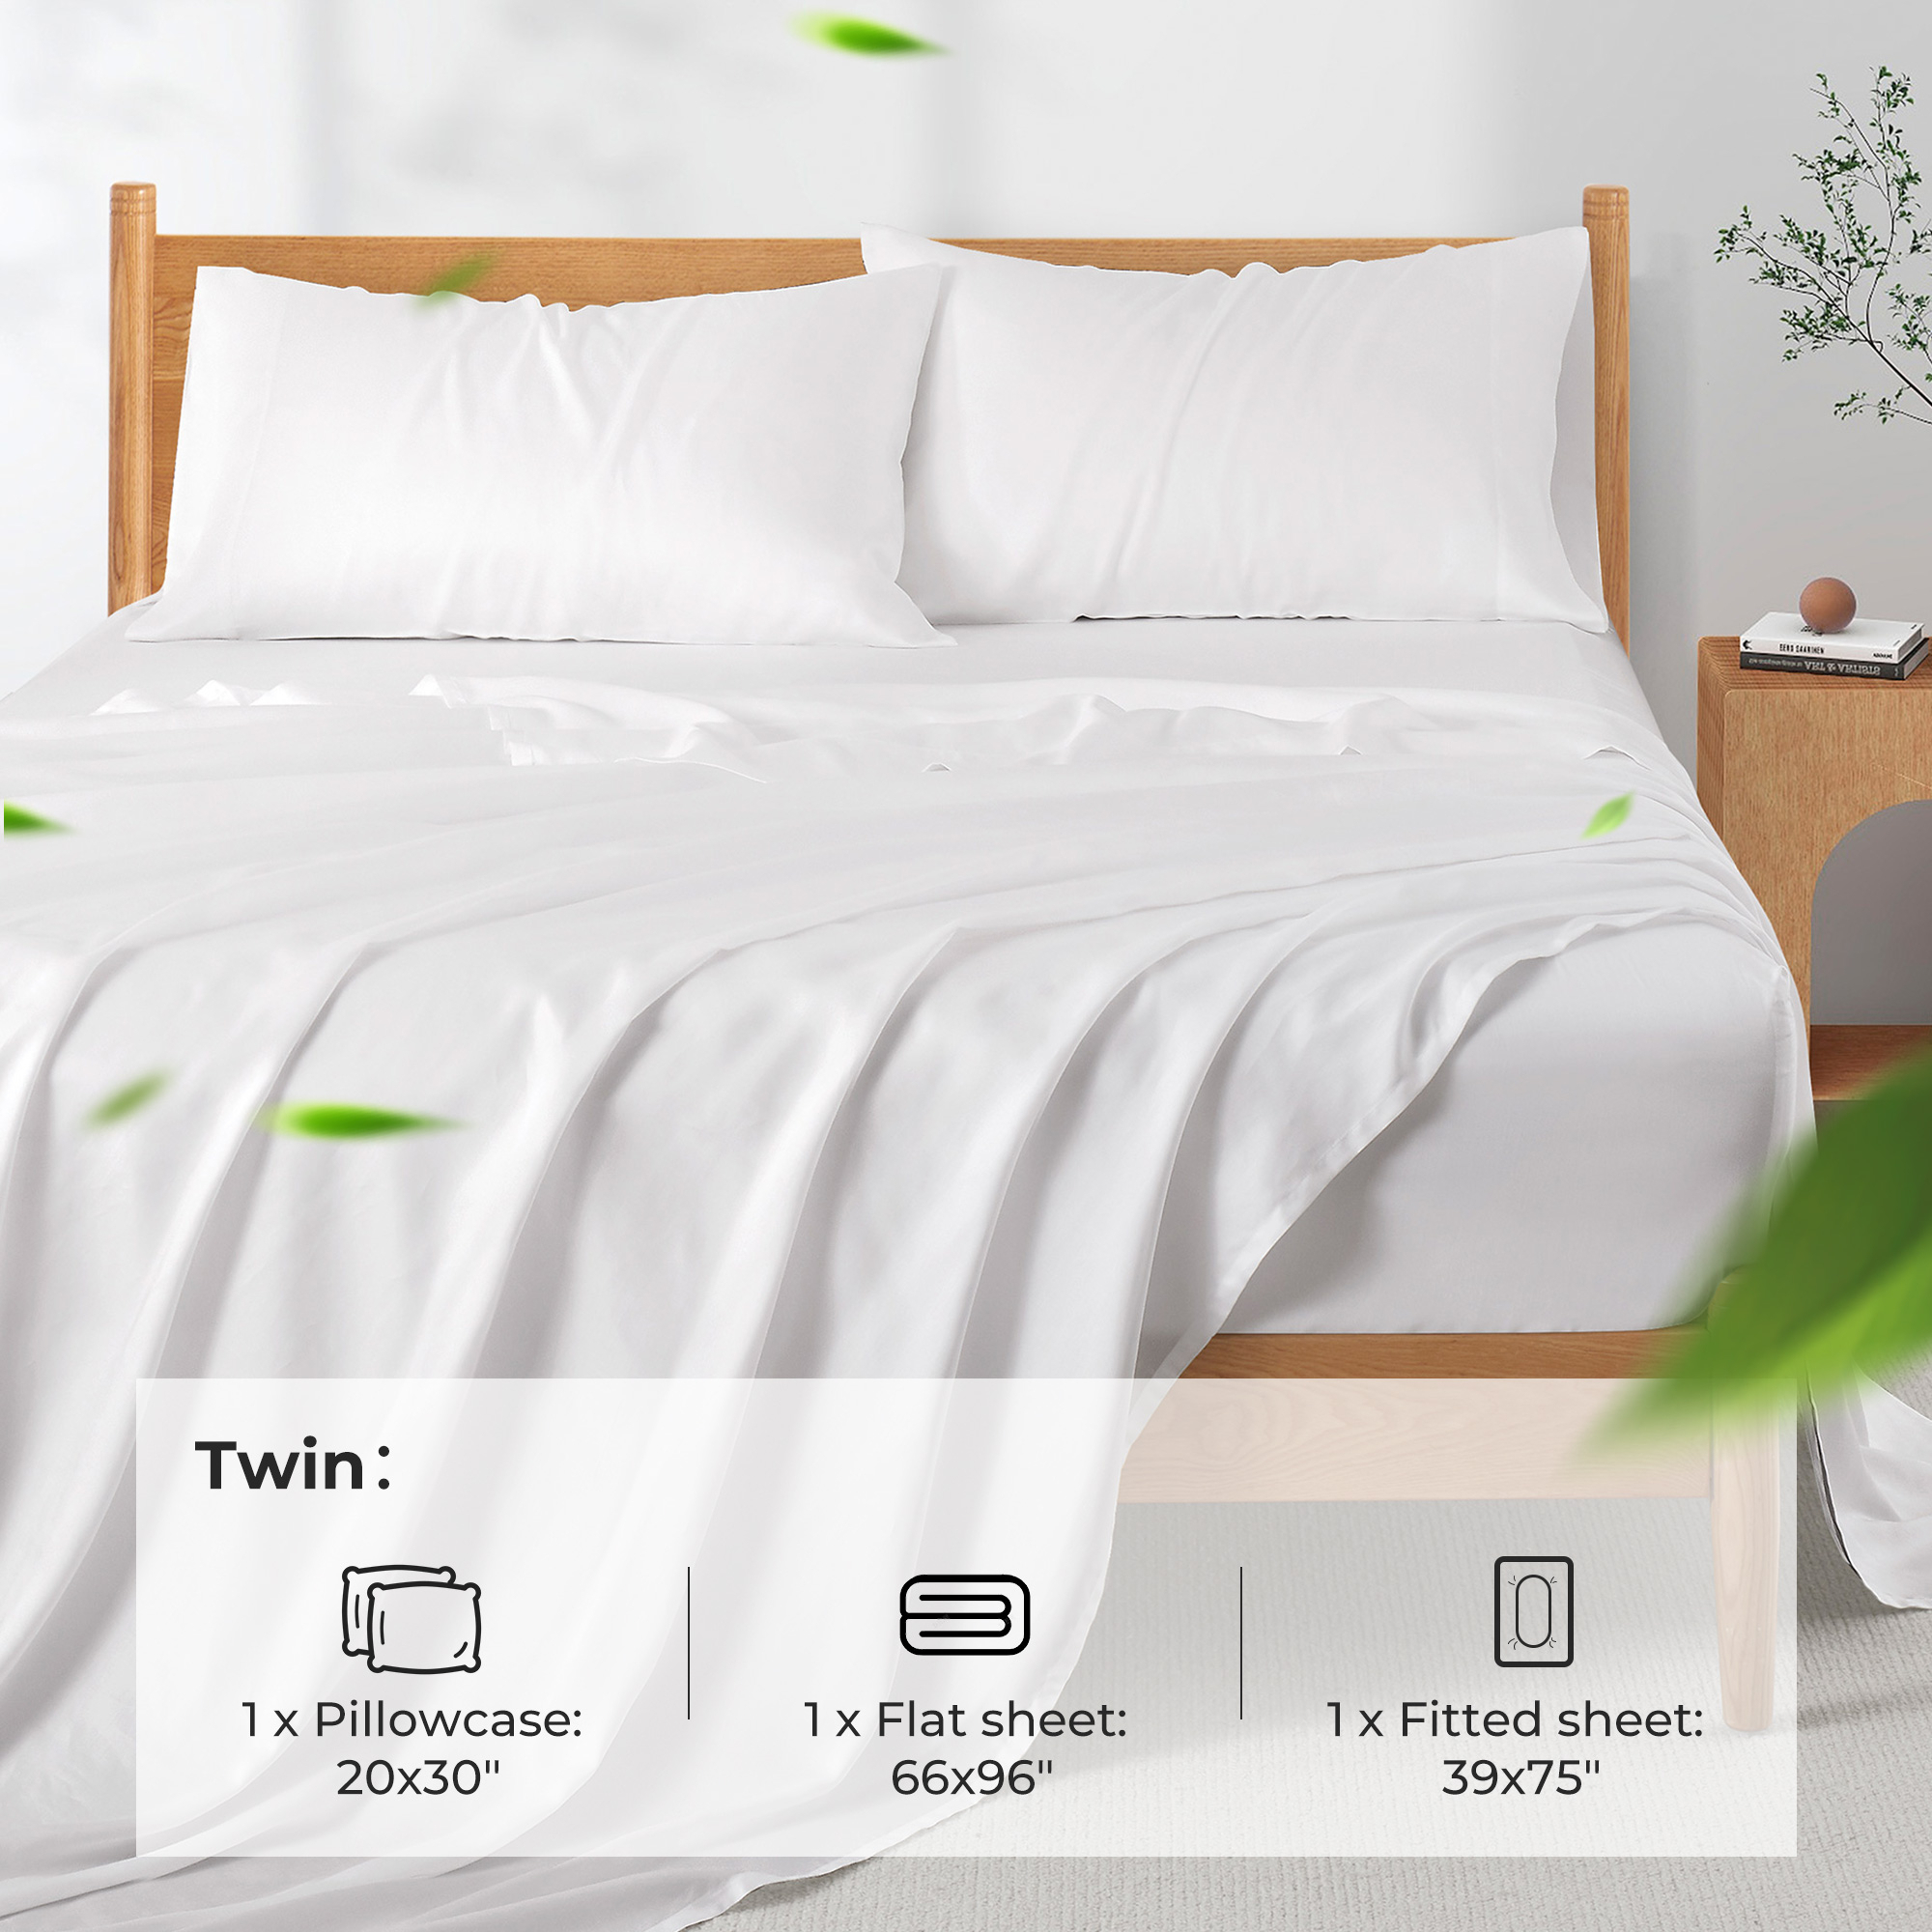 Tencel Lyocell 4Pc Sheets Set, Softest & Cooling-Deep Pocket Bottom Bed Sheet, Large Top Sheet & Pillowcases - Twin Size